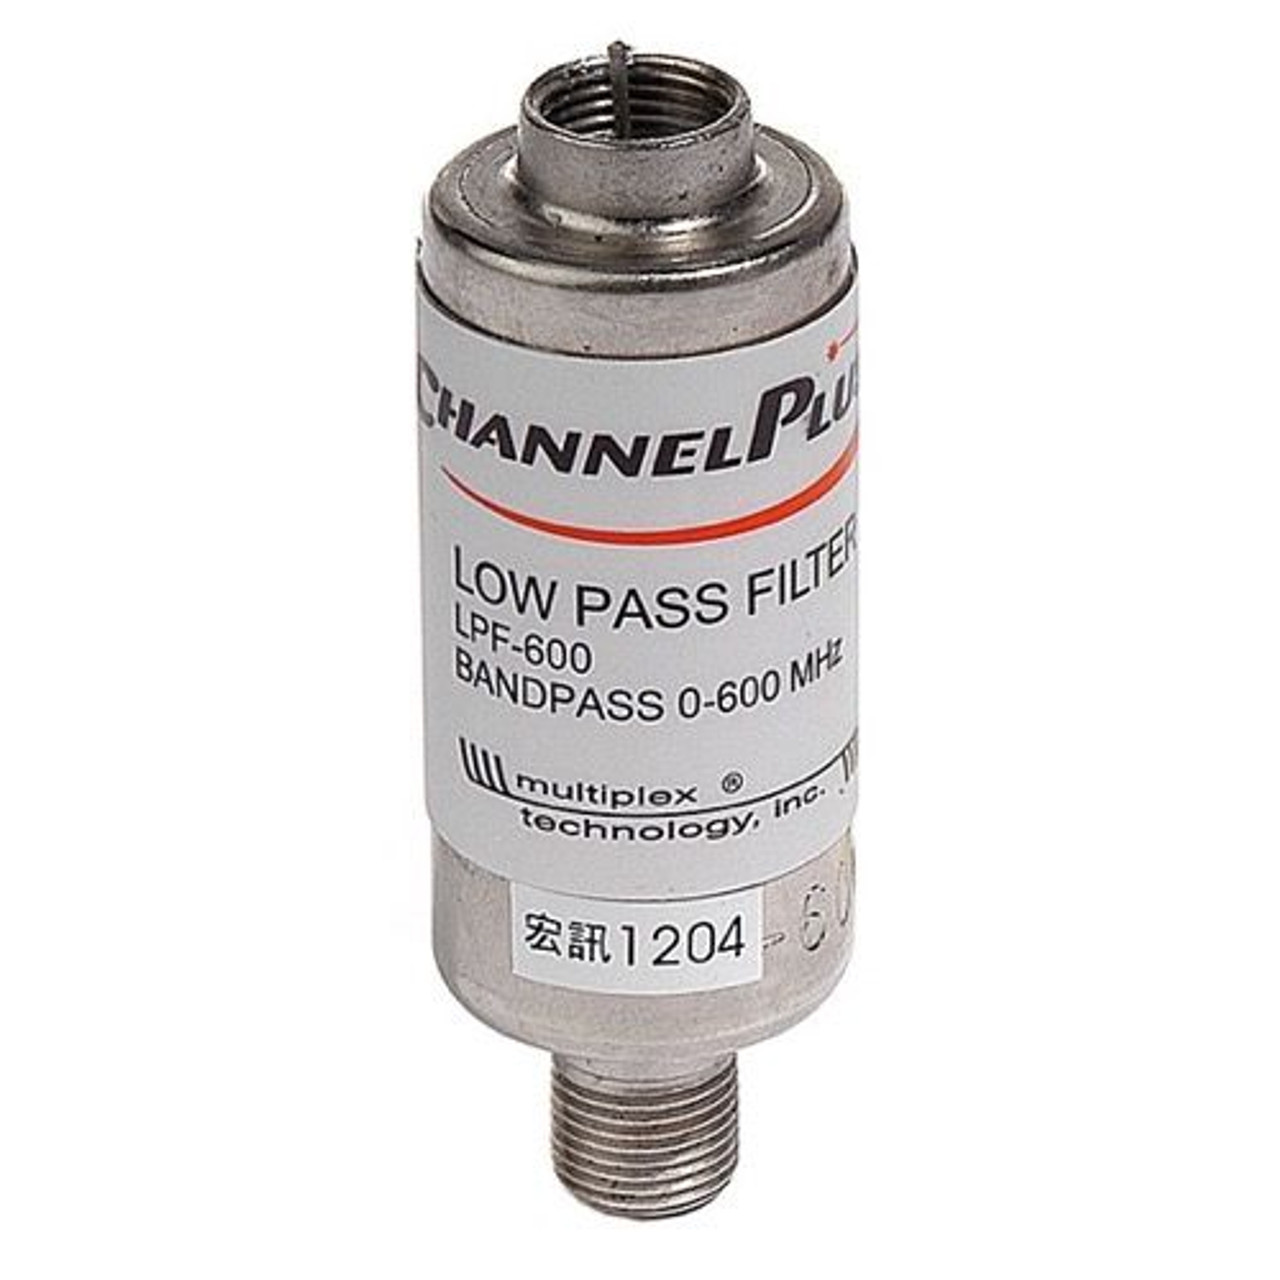 Linear LPF-600 Channel Low Pass Filter CATV Channel 2 Thru 86 600 MHz Removes CATV Channels Above the Pass Band 600 MHz 1 Pack In-Line Low Band Pass Filter Coupler Barrel Adapter, Part # LPF-600